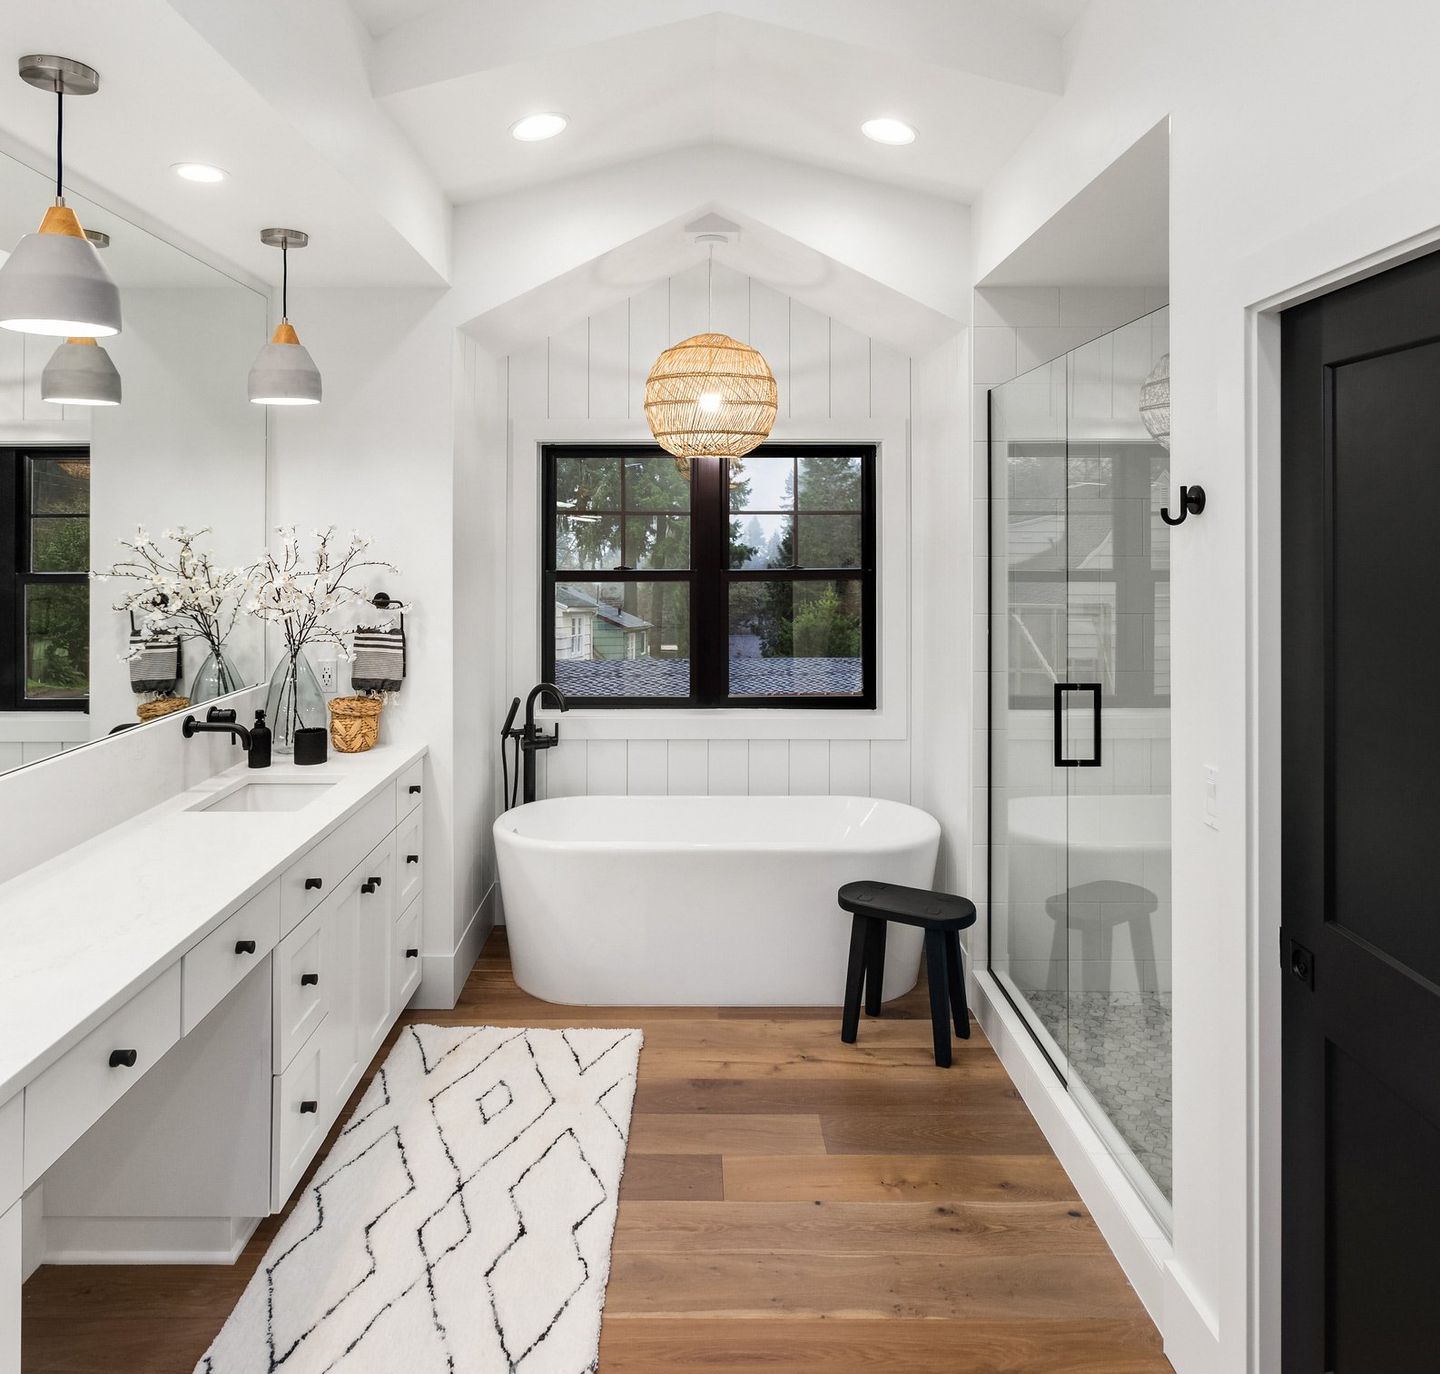 How Much Does Bathroom Remodeling Typically Cost? - Reno - DreamMaker Bath  & Kitchen